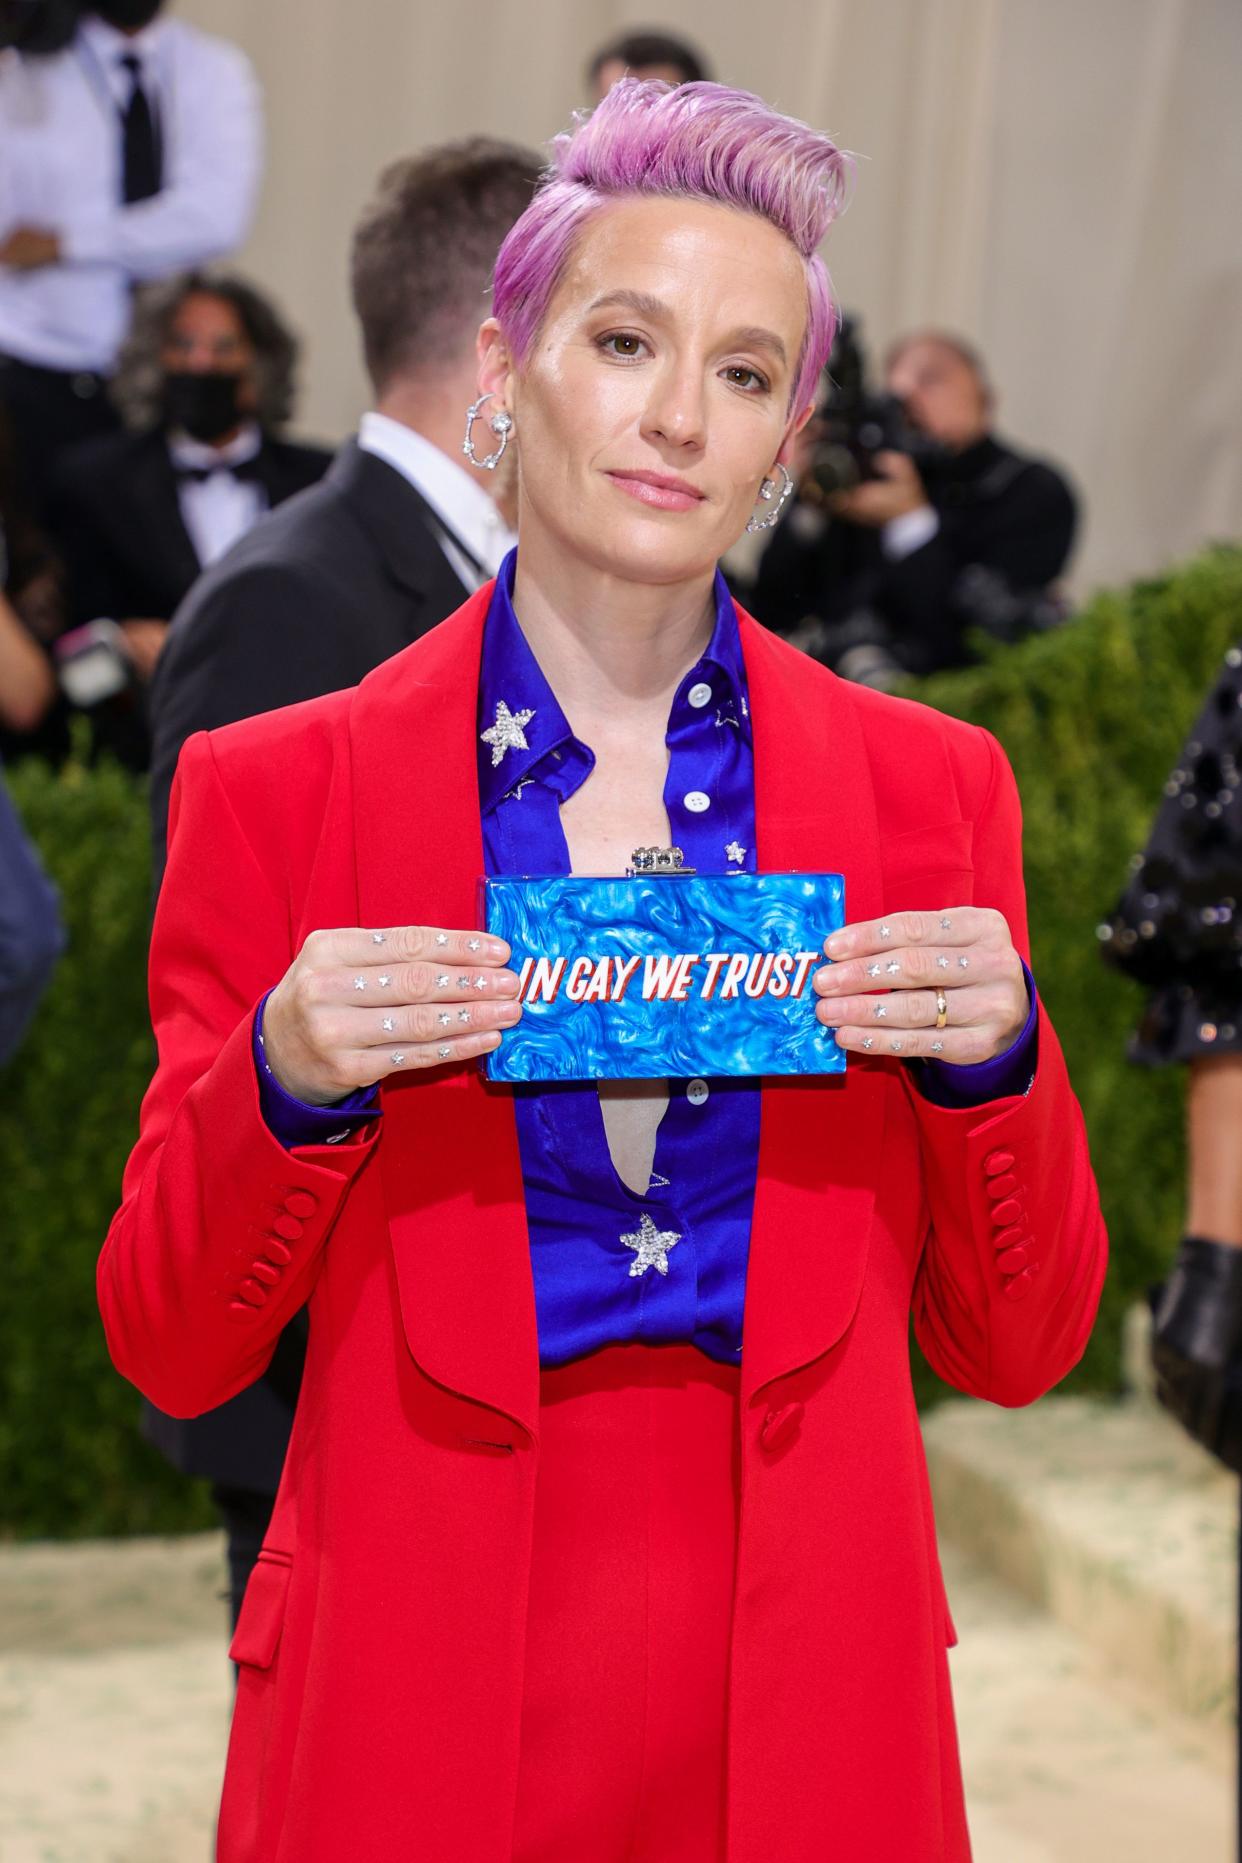 Megan Rapinoe attends The 2021 Met Gala Celebrating In America: A Lexicon Of Fashion at Metropolitan Museum of Art on Sept. 13, 2021 in New York.